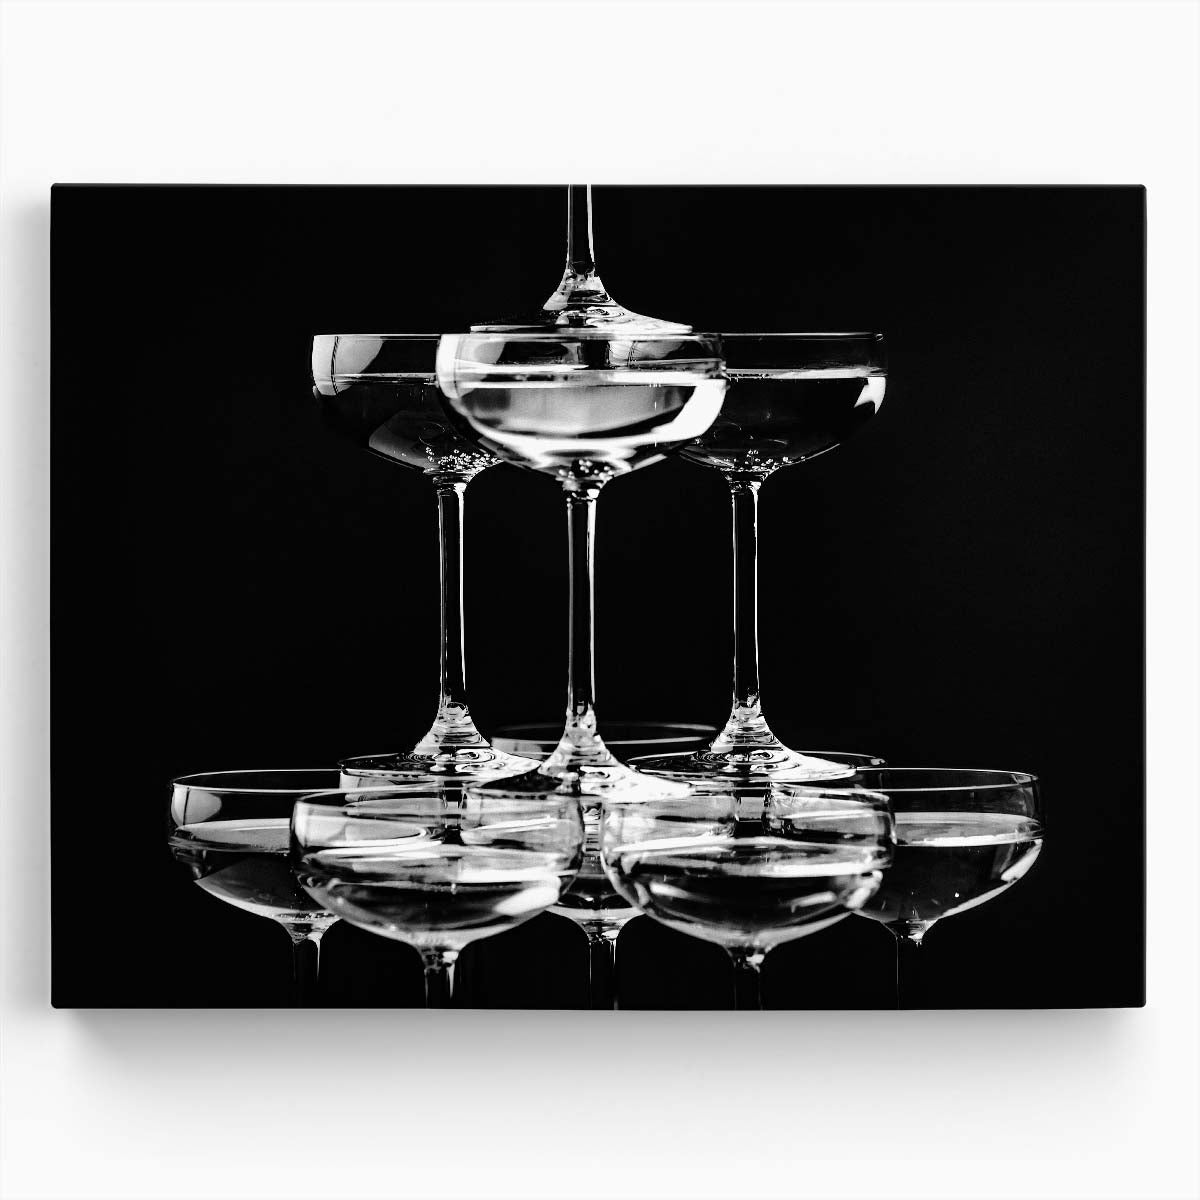 Elegant Champagne Tower Celebration Monochrome Wall Art by Luxuriance Designs. Made in USA.